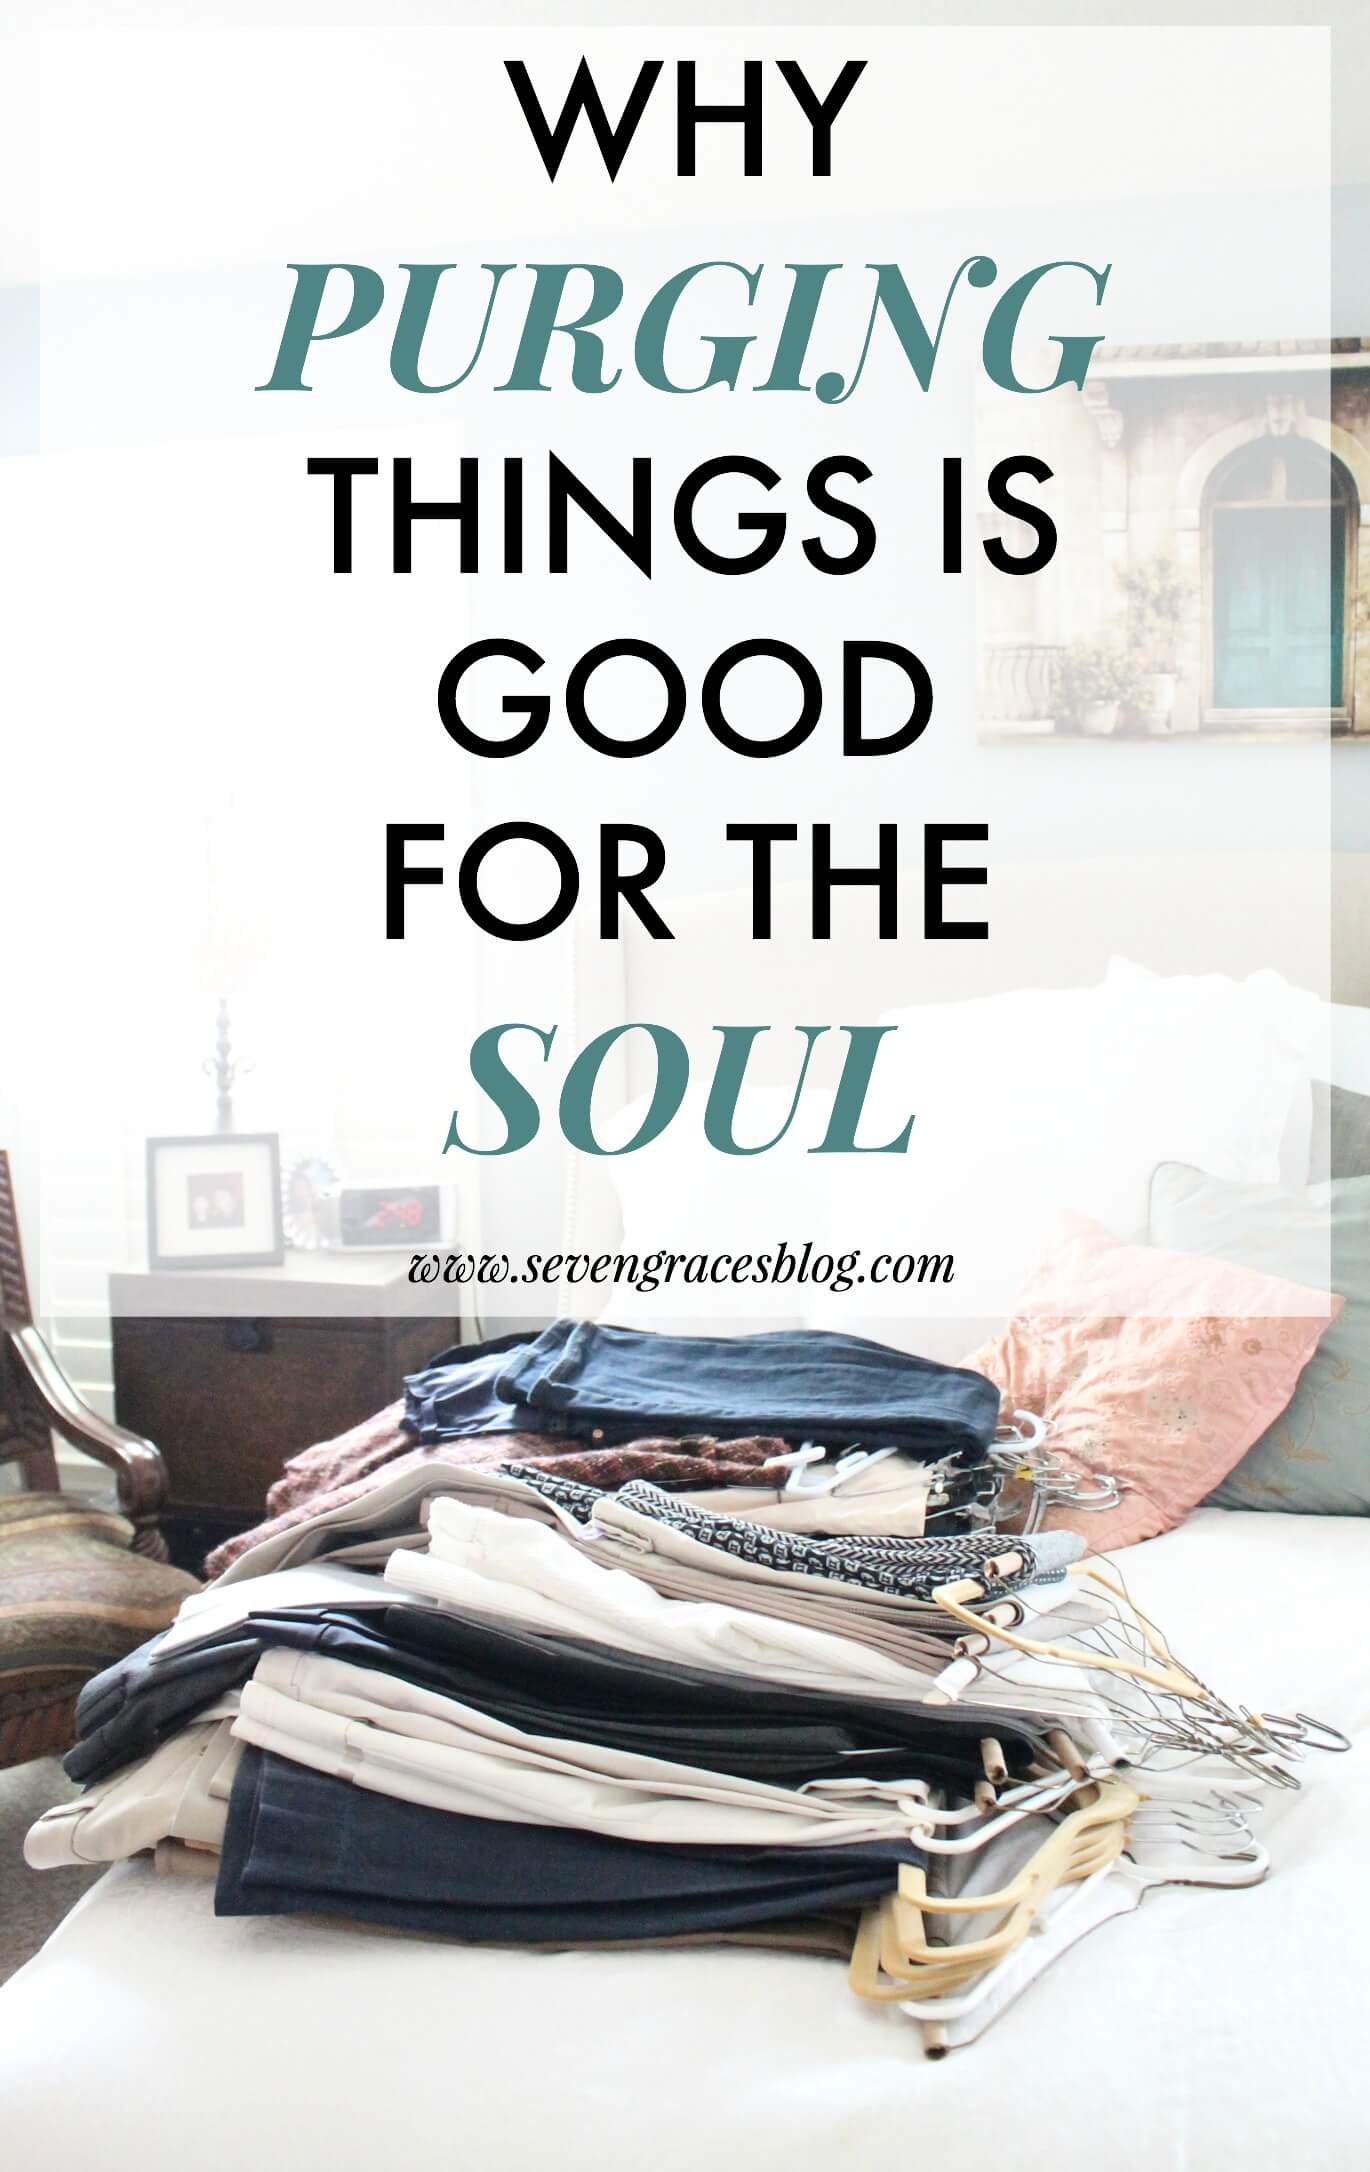 Why purging things is good for the soul. Making room for more by getting rid of all the clutter. See how cleaning out a closet can bring so much clarity.